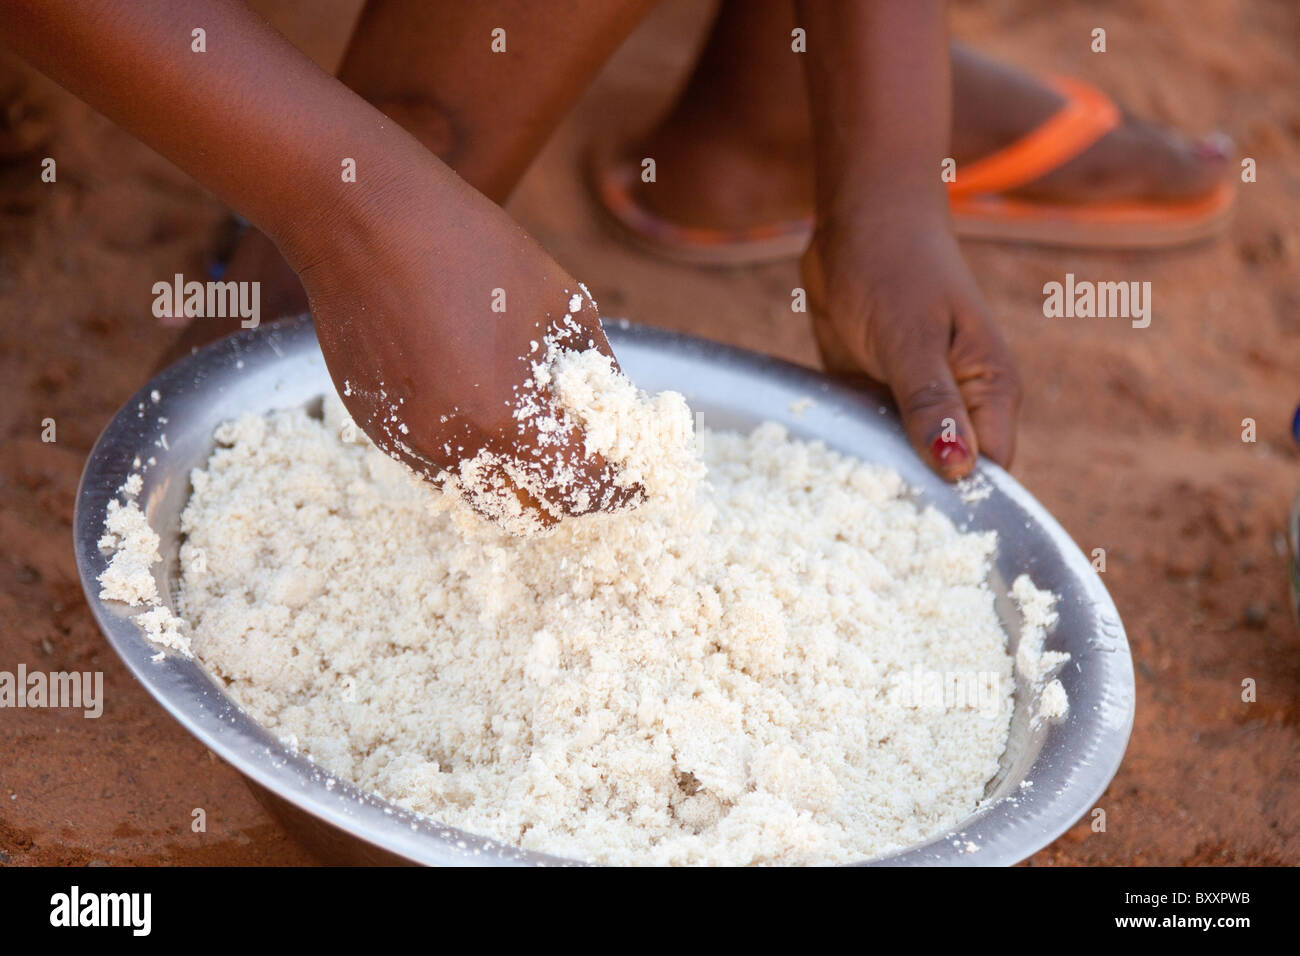 A Fulani woman in the town of Djibo in northern Burkina Faso kneads manioc flour, which she will use to make couscous (attieke). Stock Photo